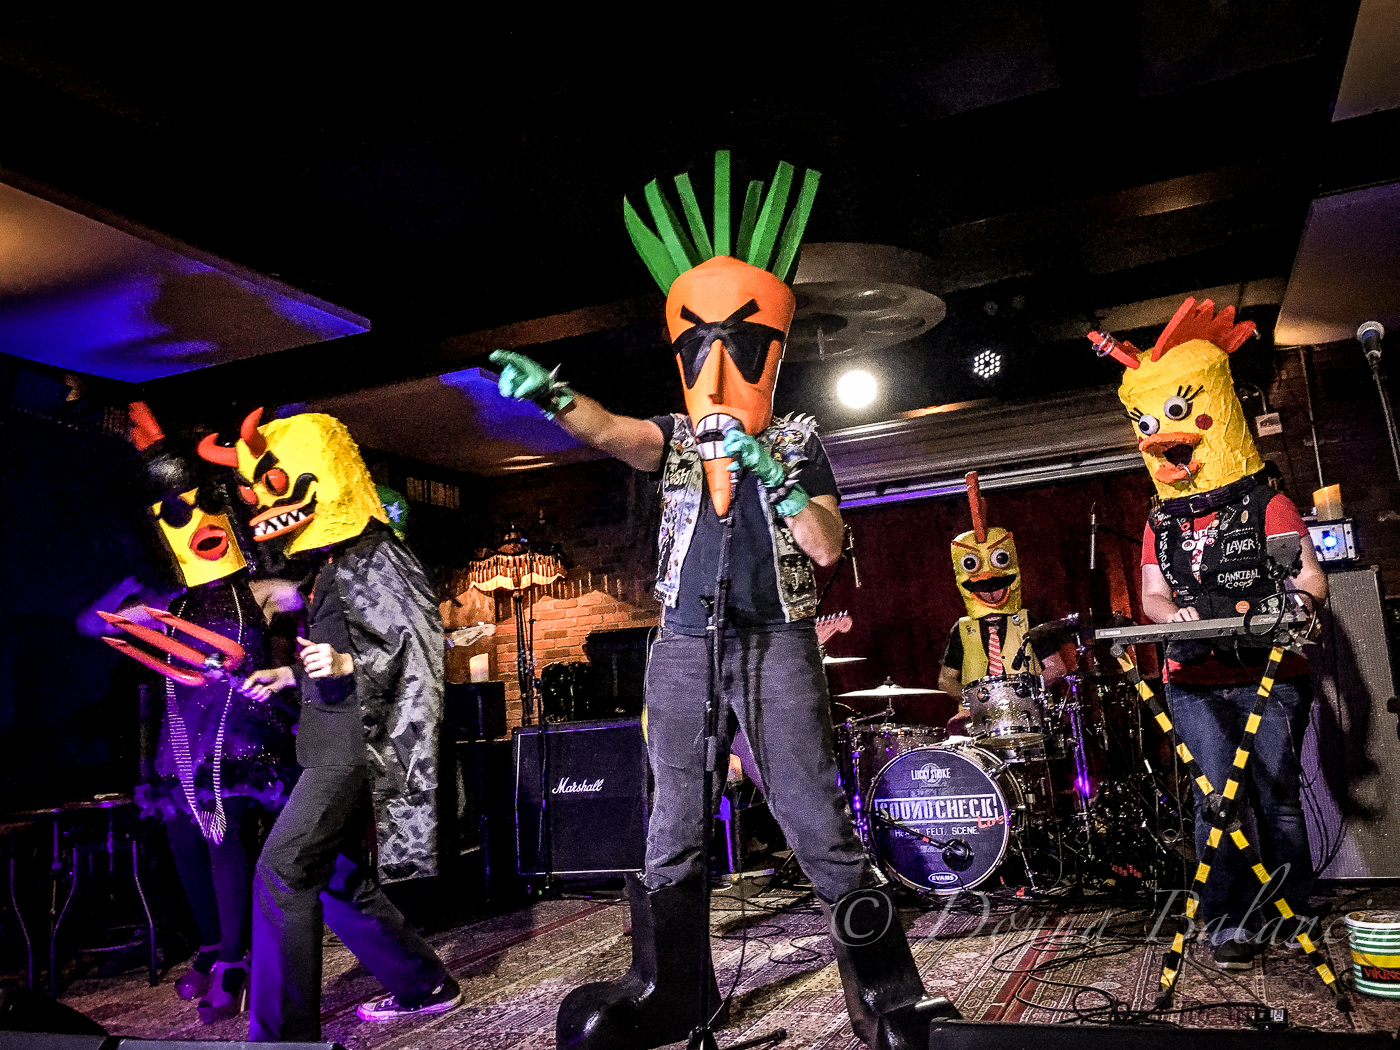 Powerman 5000 and the Radioactive Chicken Heads Draw a New Arts Crowd to  Our Favorite Bowling Alley – US Rocker